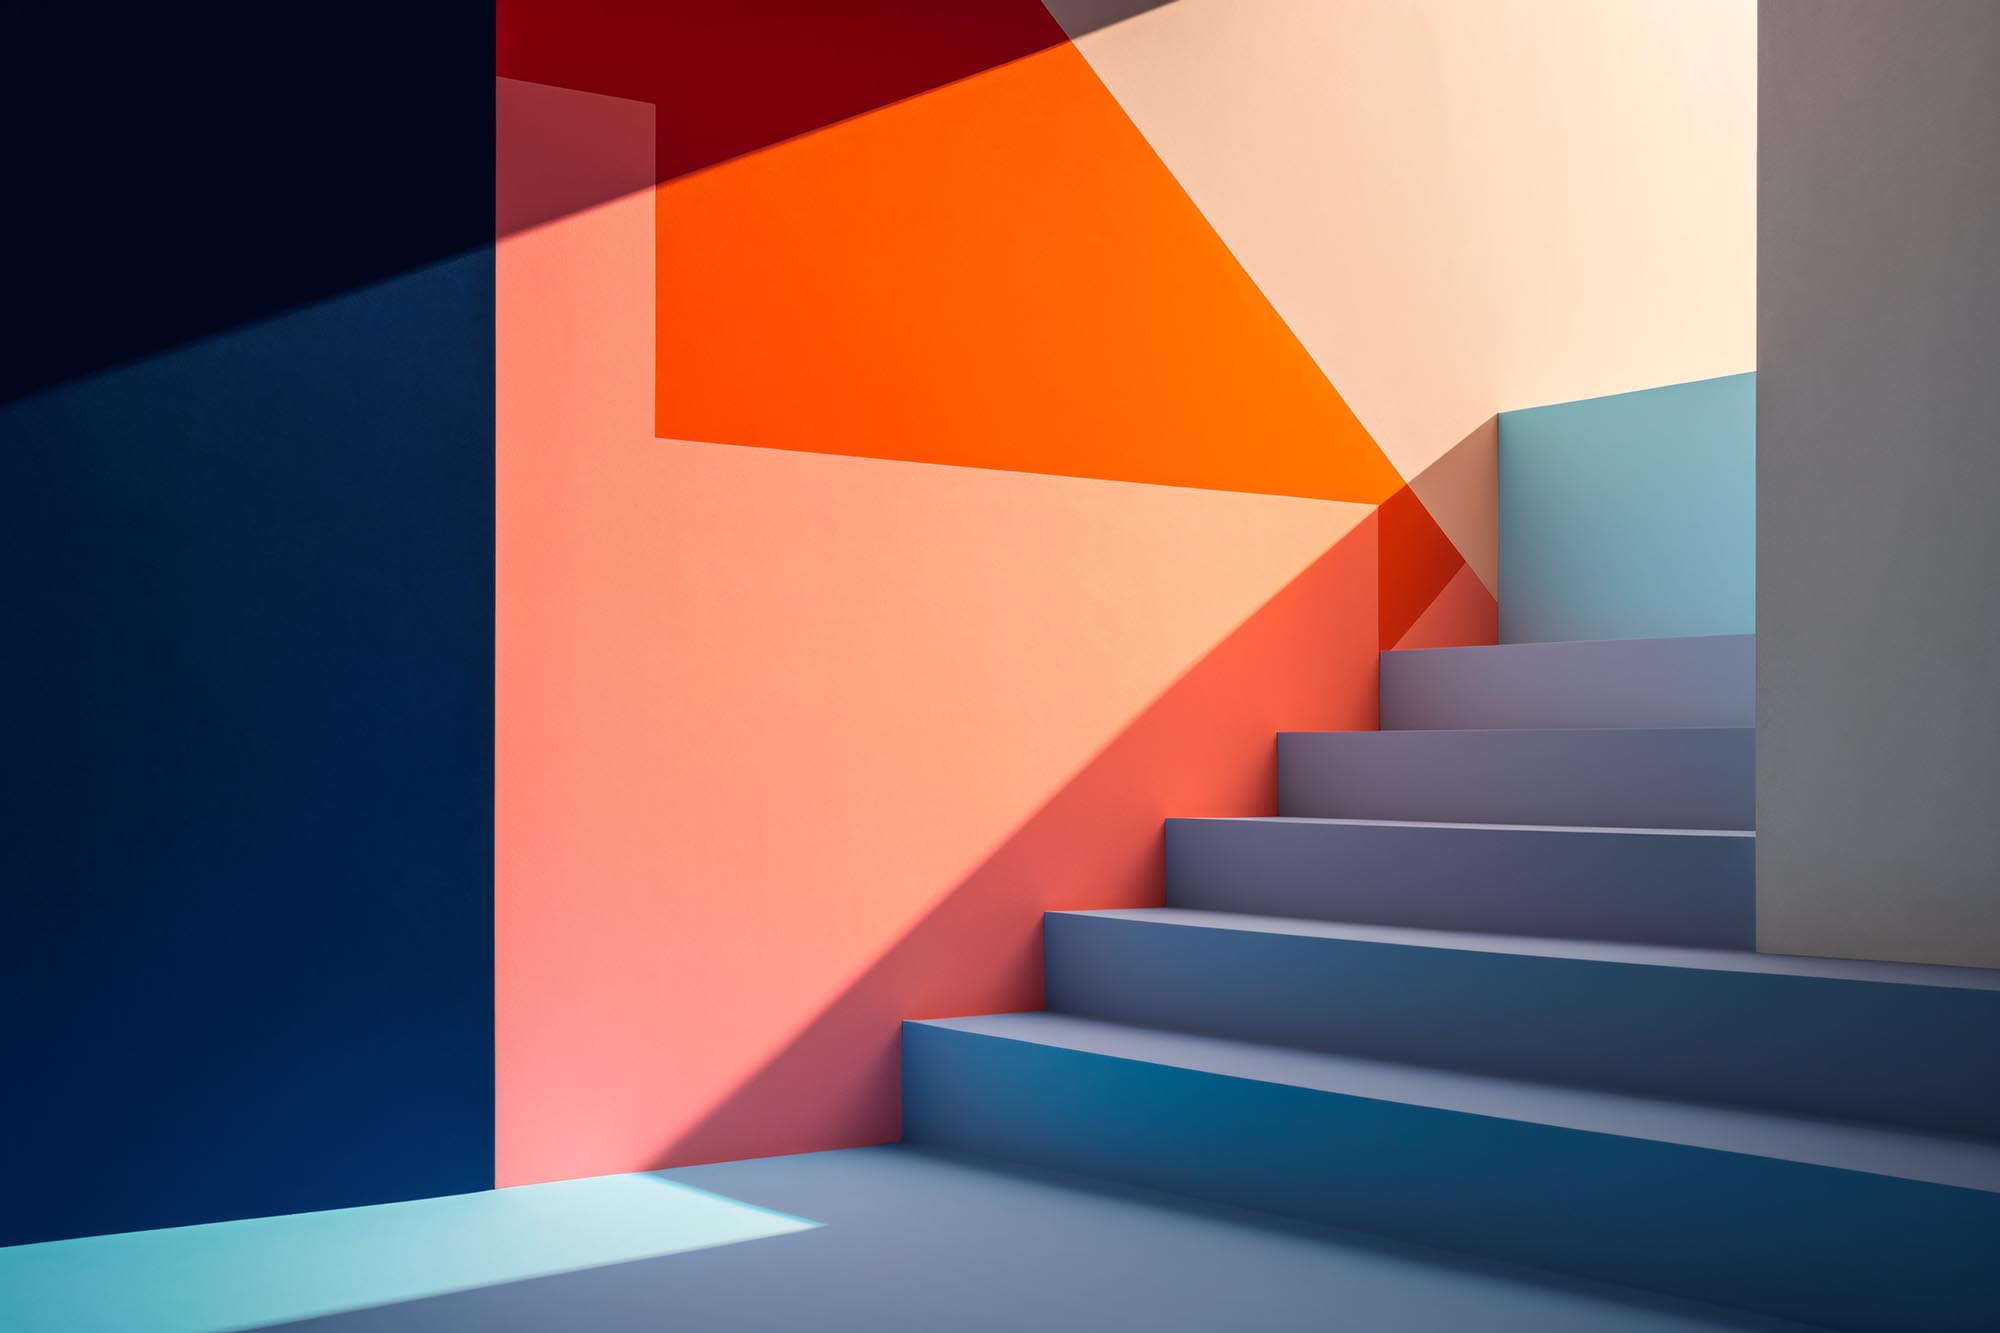 Geometrical multicolored background with stairs and shadows, minimalist colored background